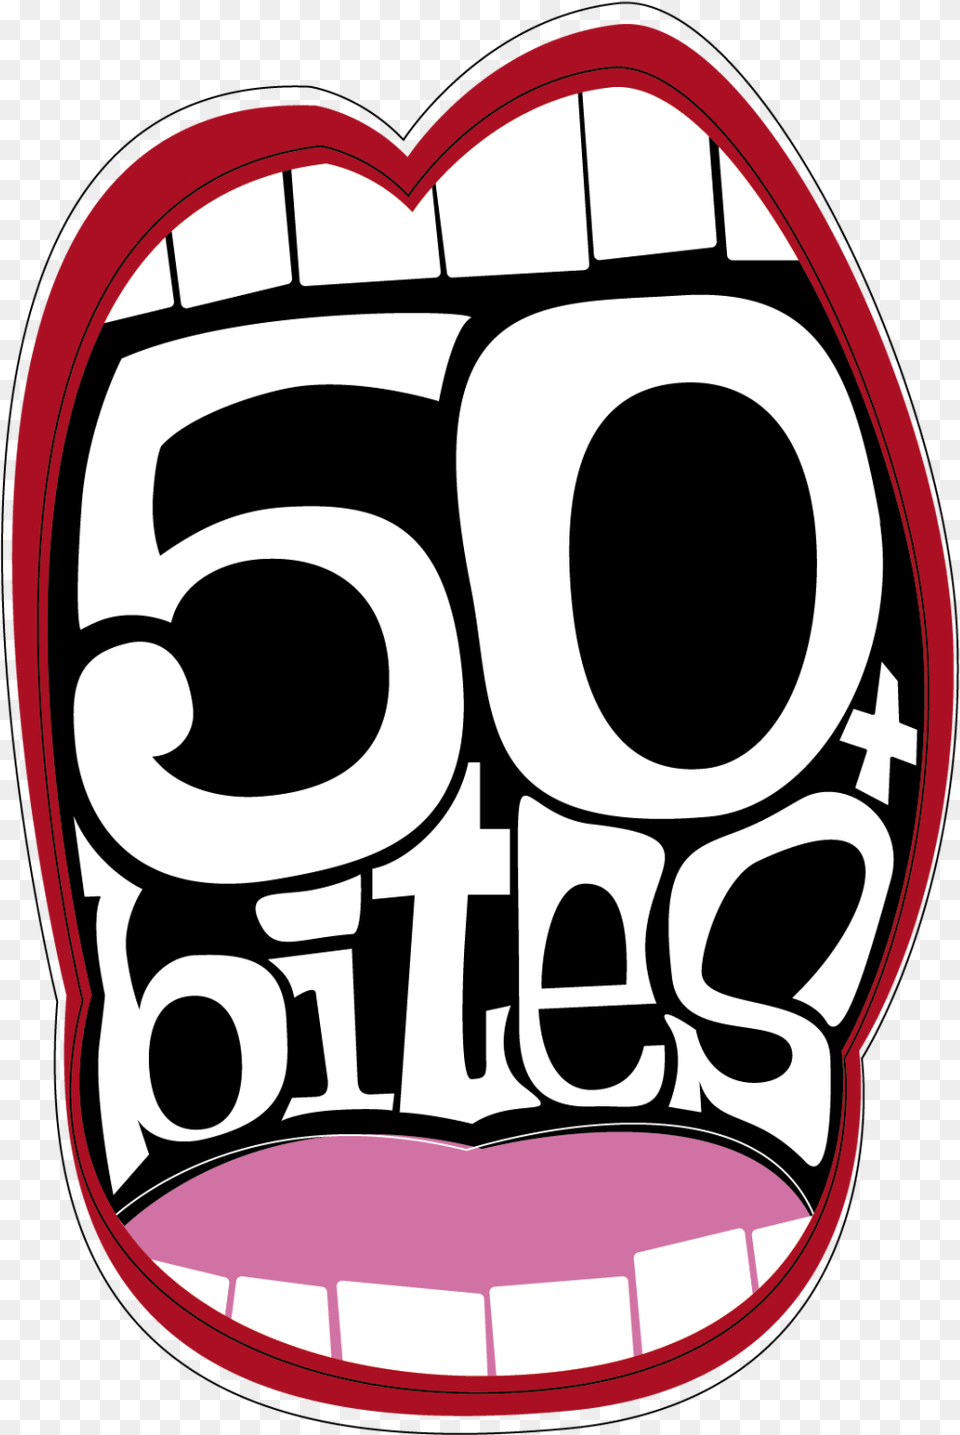 Get Your 50 Bites Passes For 30 The Madness Begins, Sticker Free Png Download